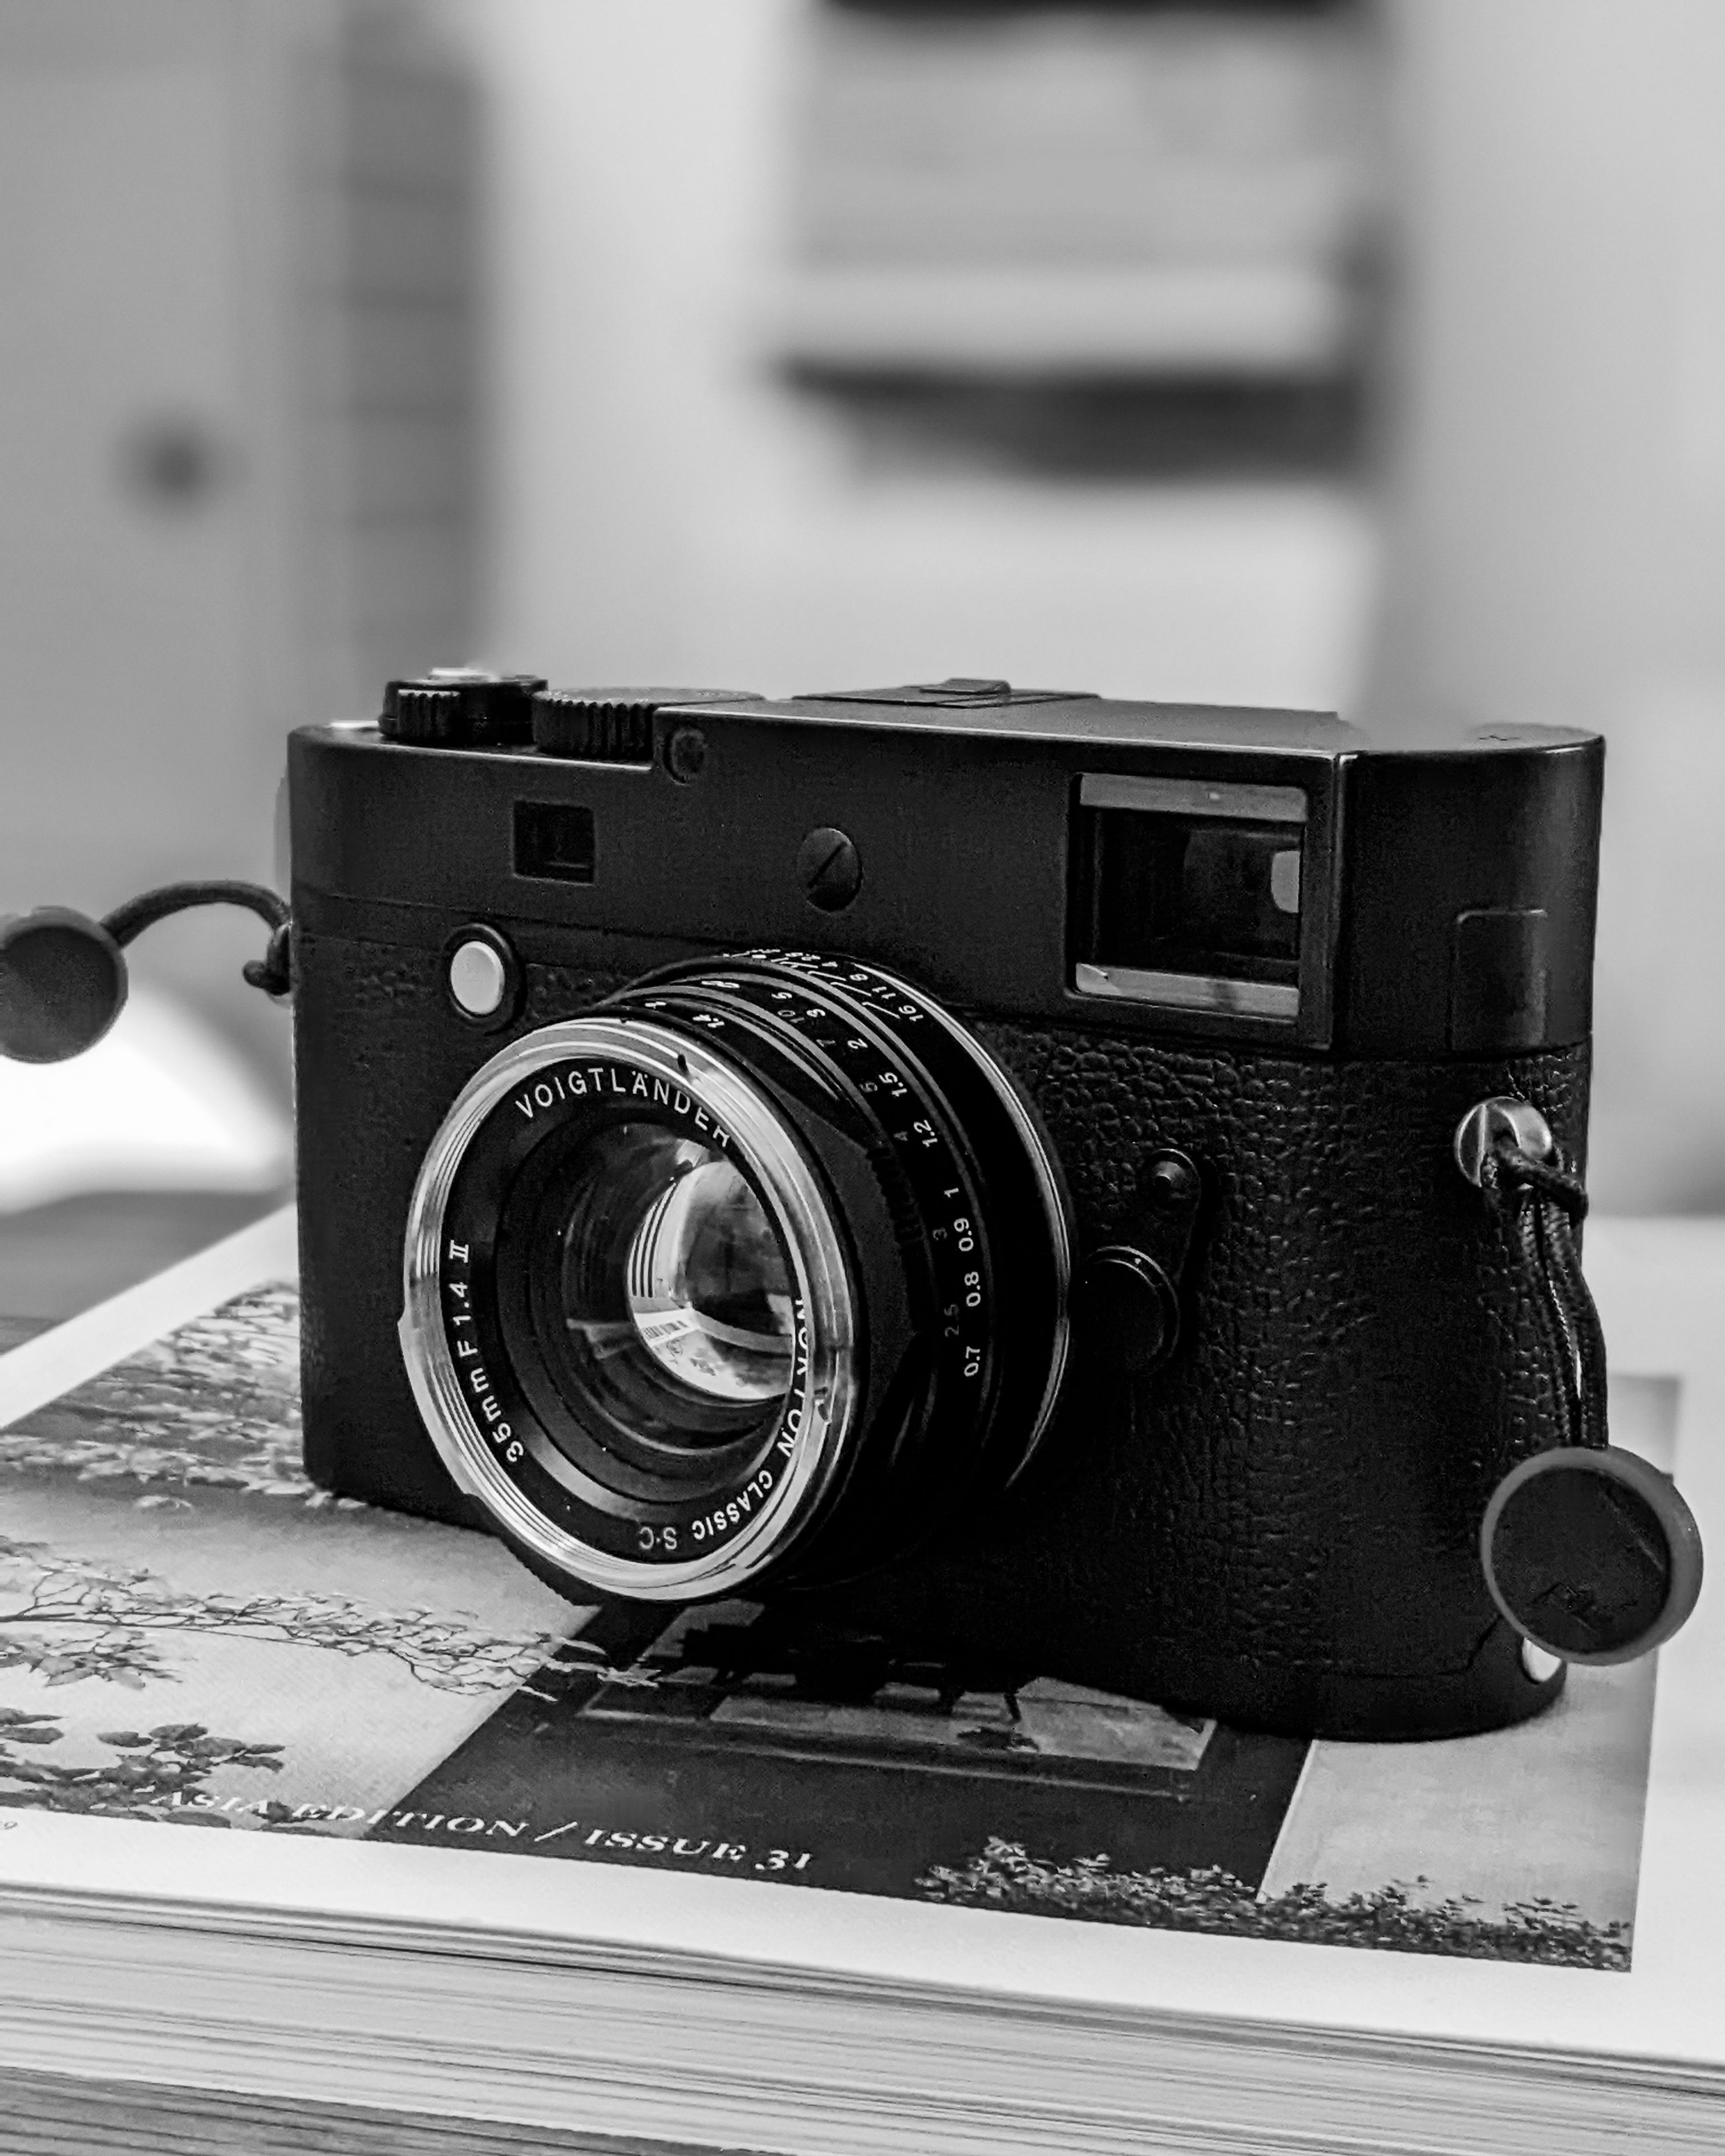 A film shooter's review of the Leica M typ 246 Monochrome | Medium